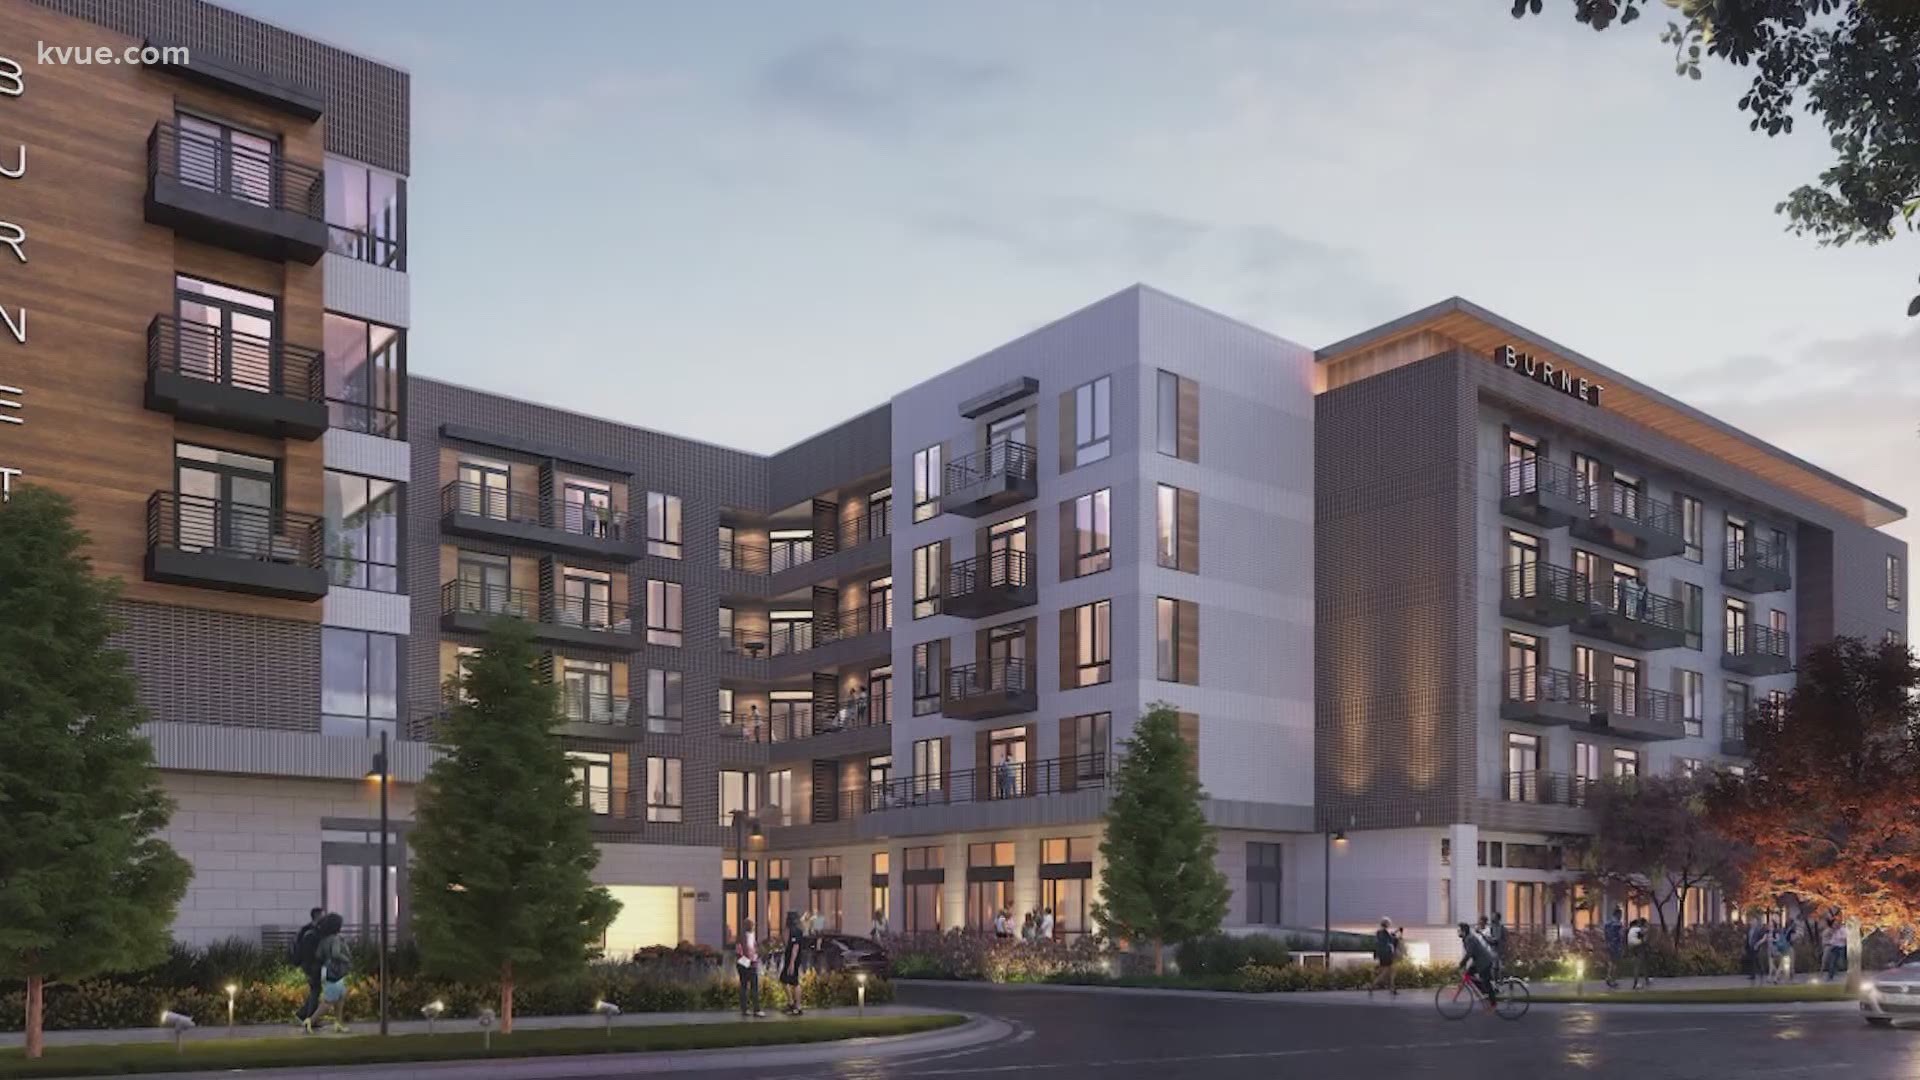 A new apartment complex could soon be built on the former site of The Frisco Shop on Burnet Road.